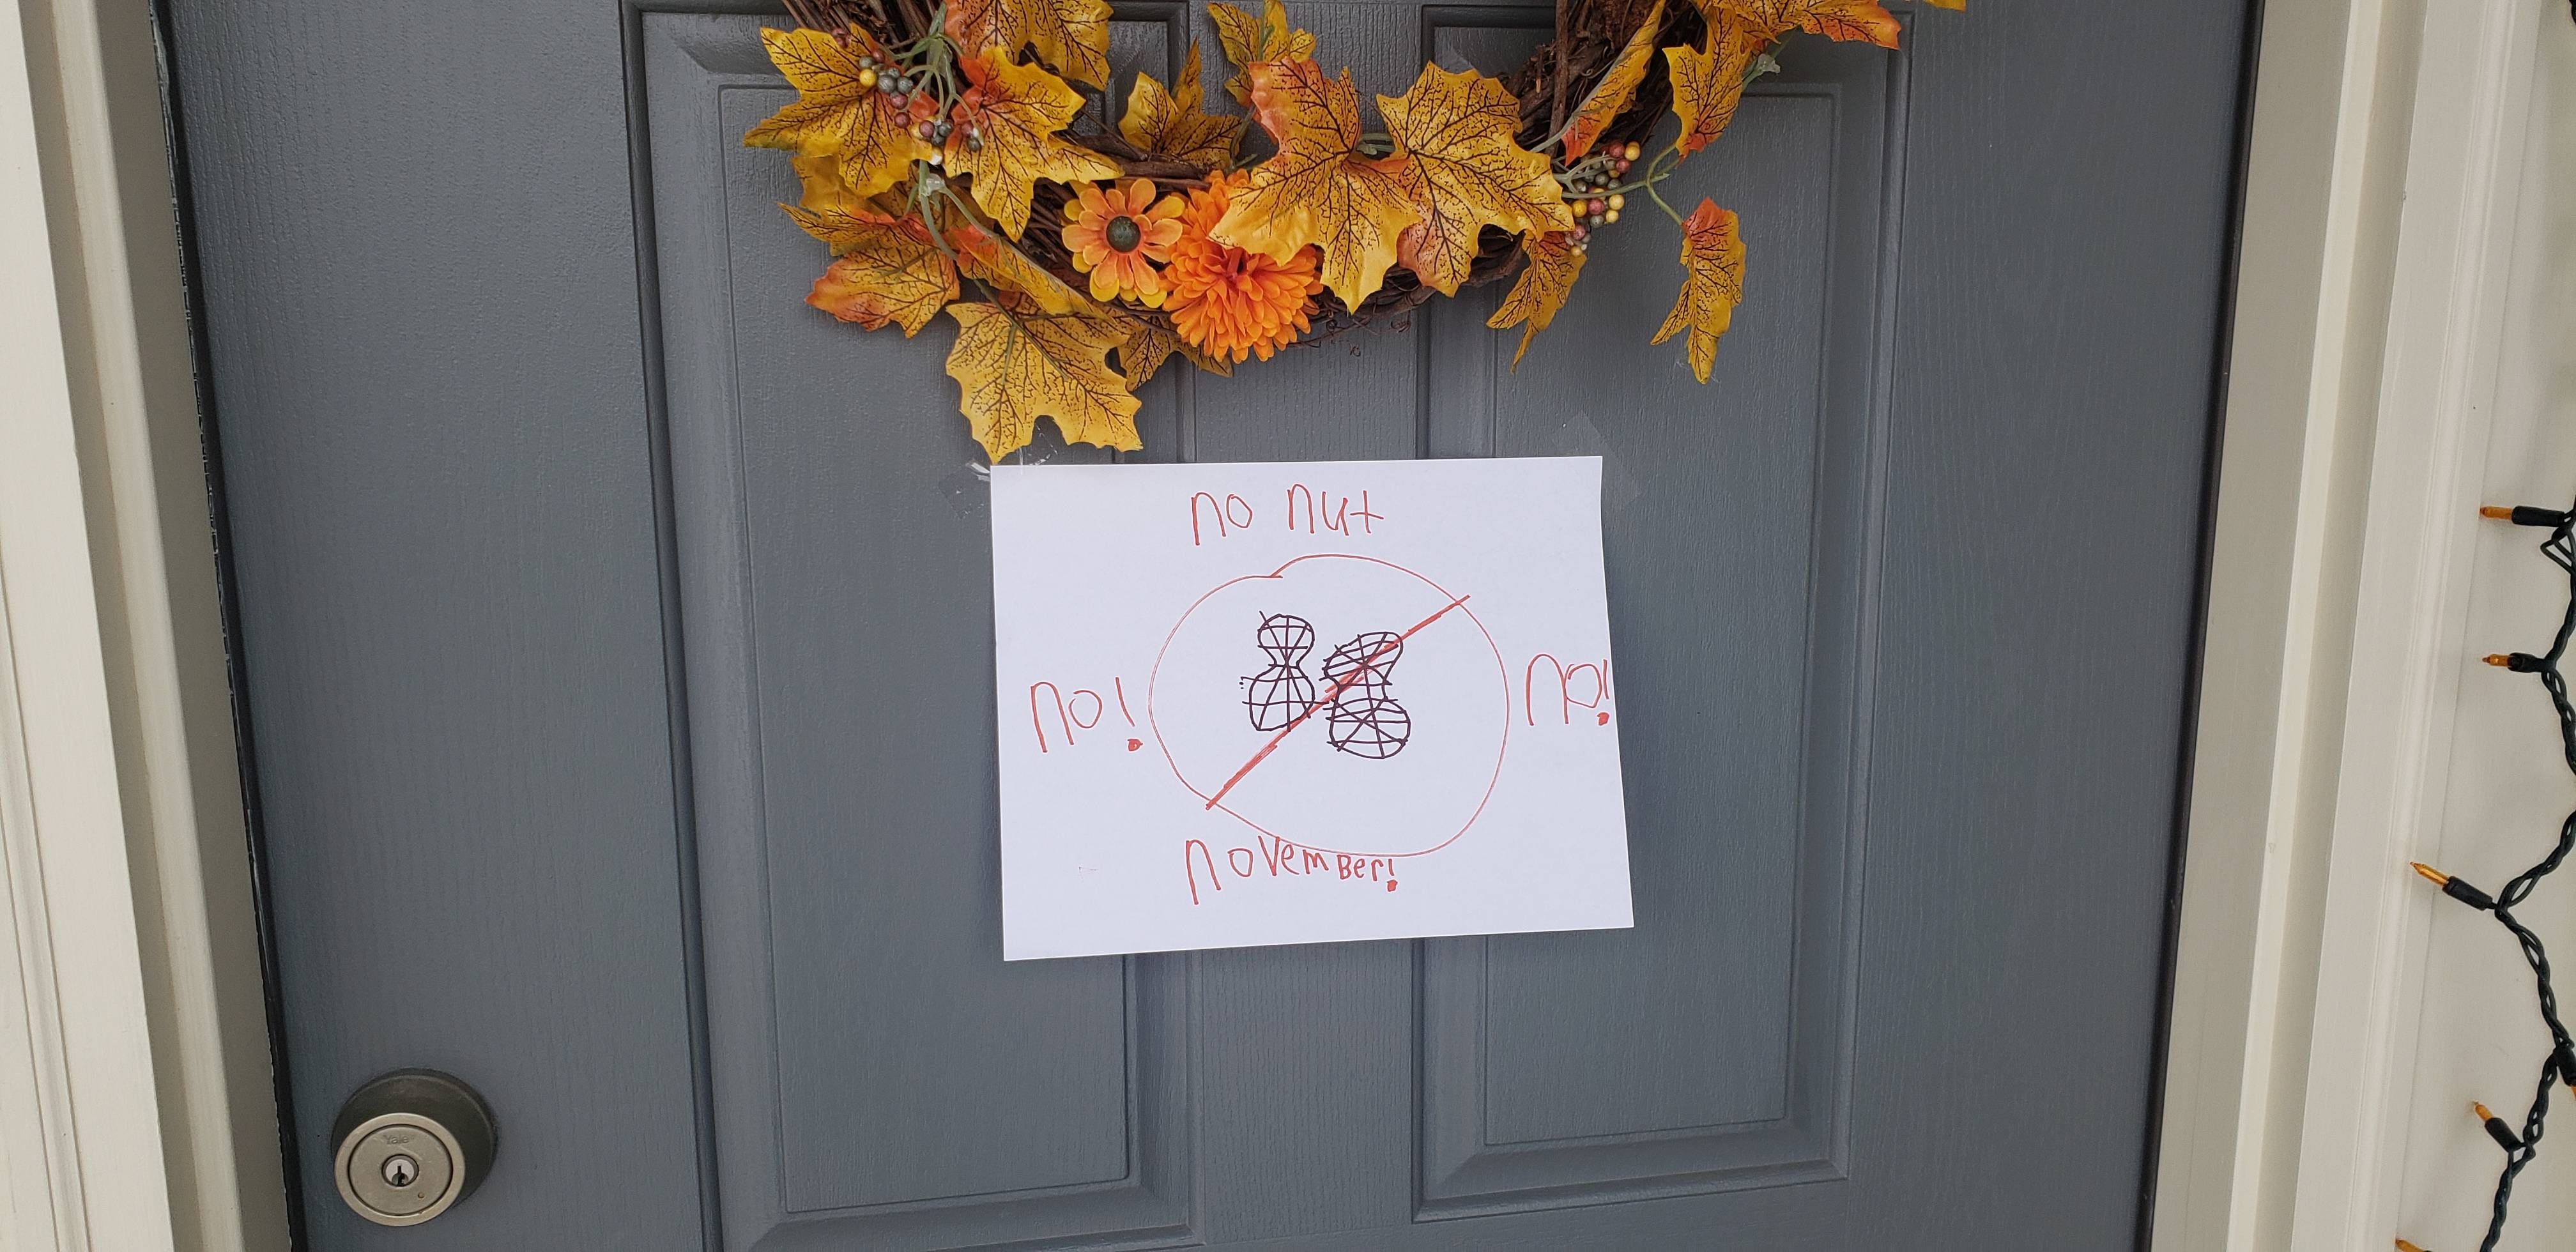 My 9 year old son put this on our front door for the world to see. He thought it was for nut allergy awareness. Don't have the heart to tell him.